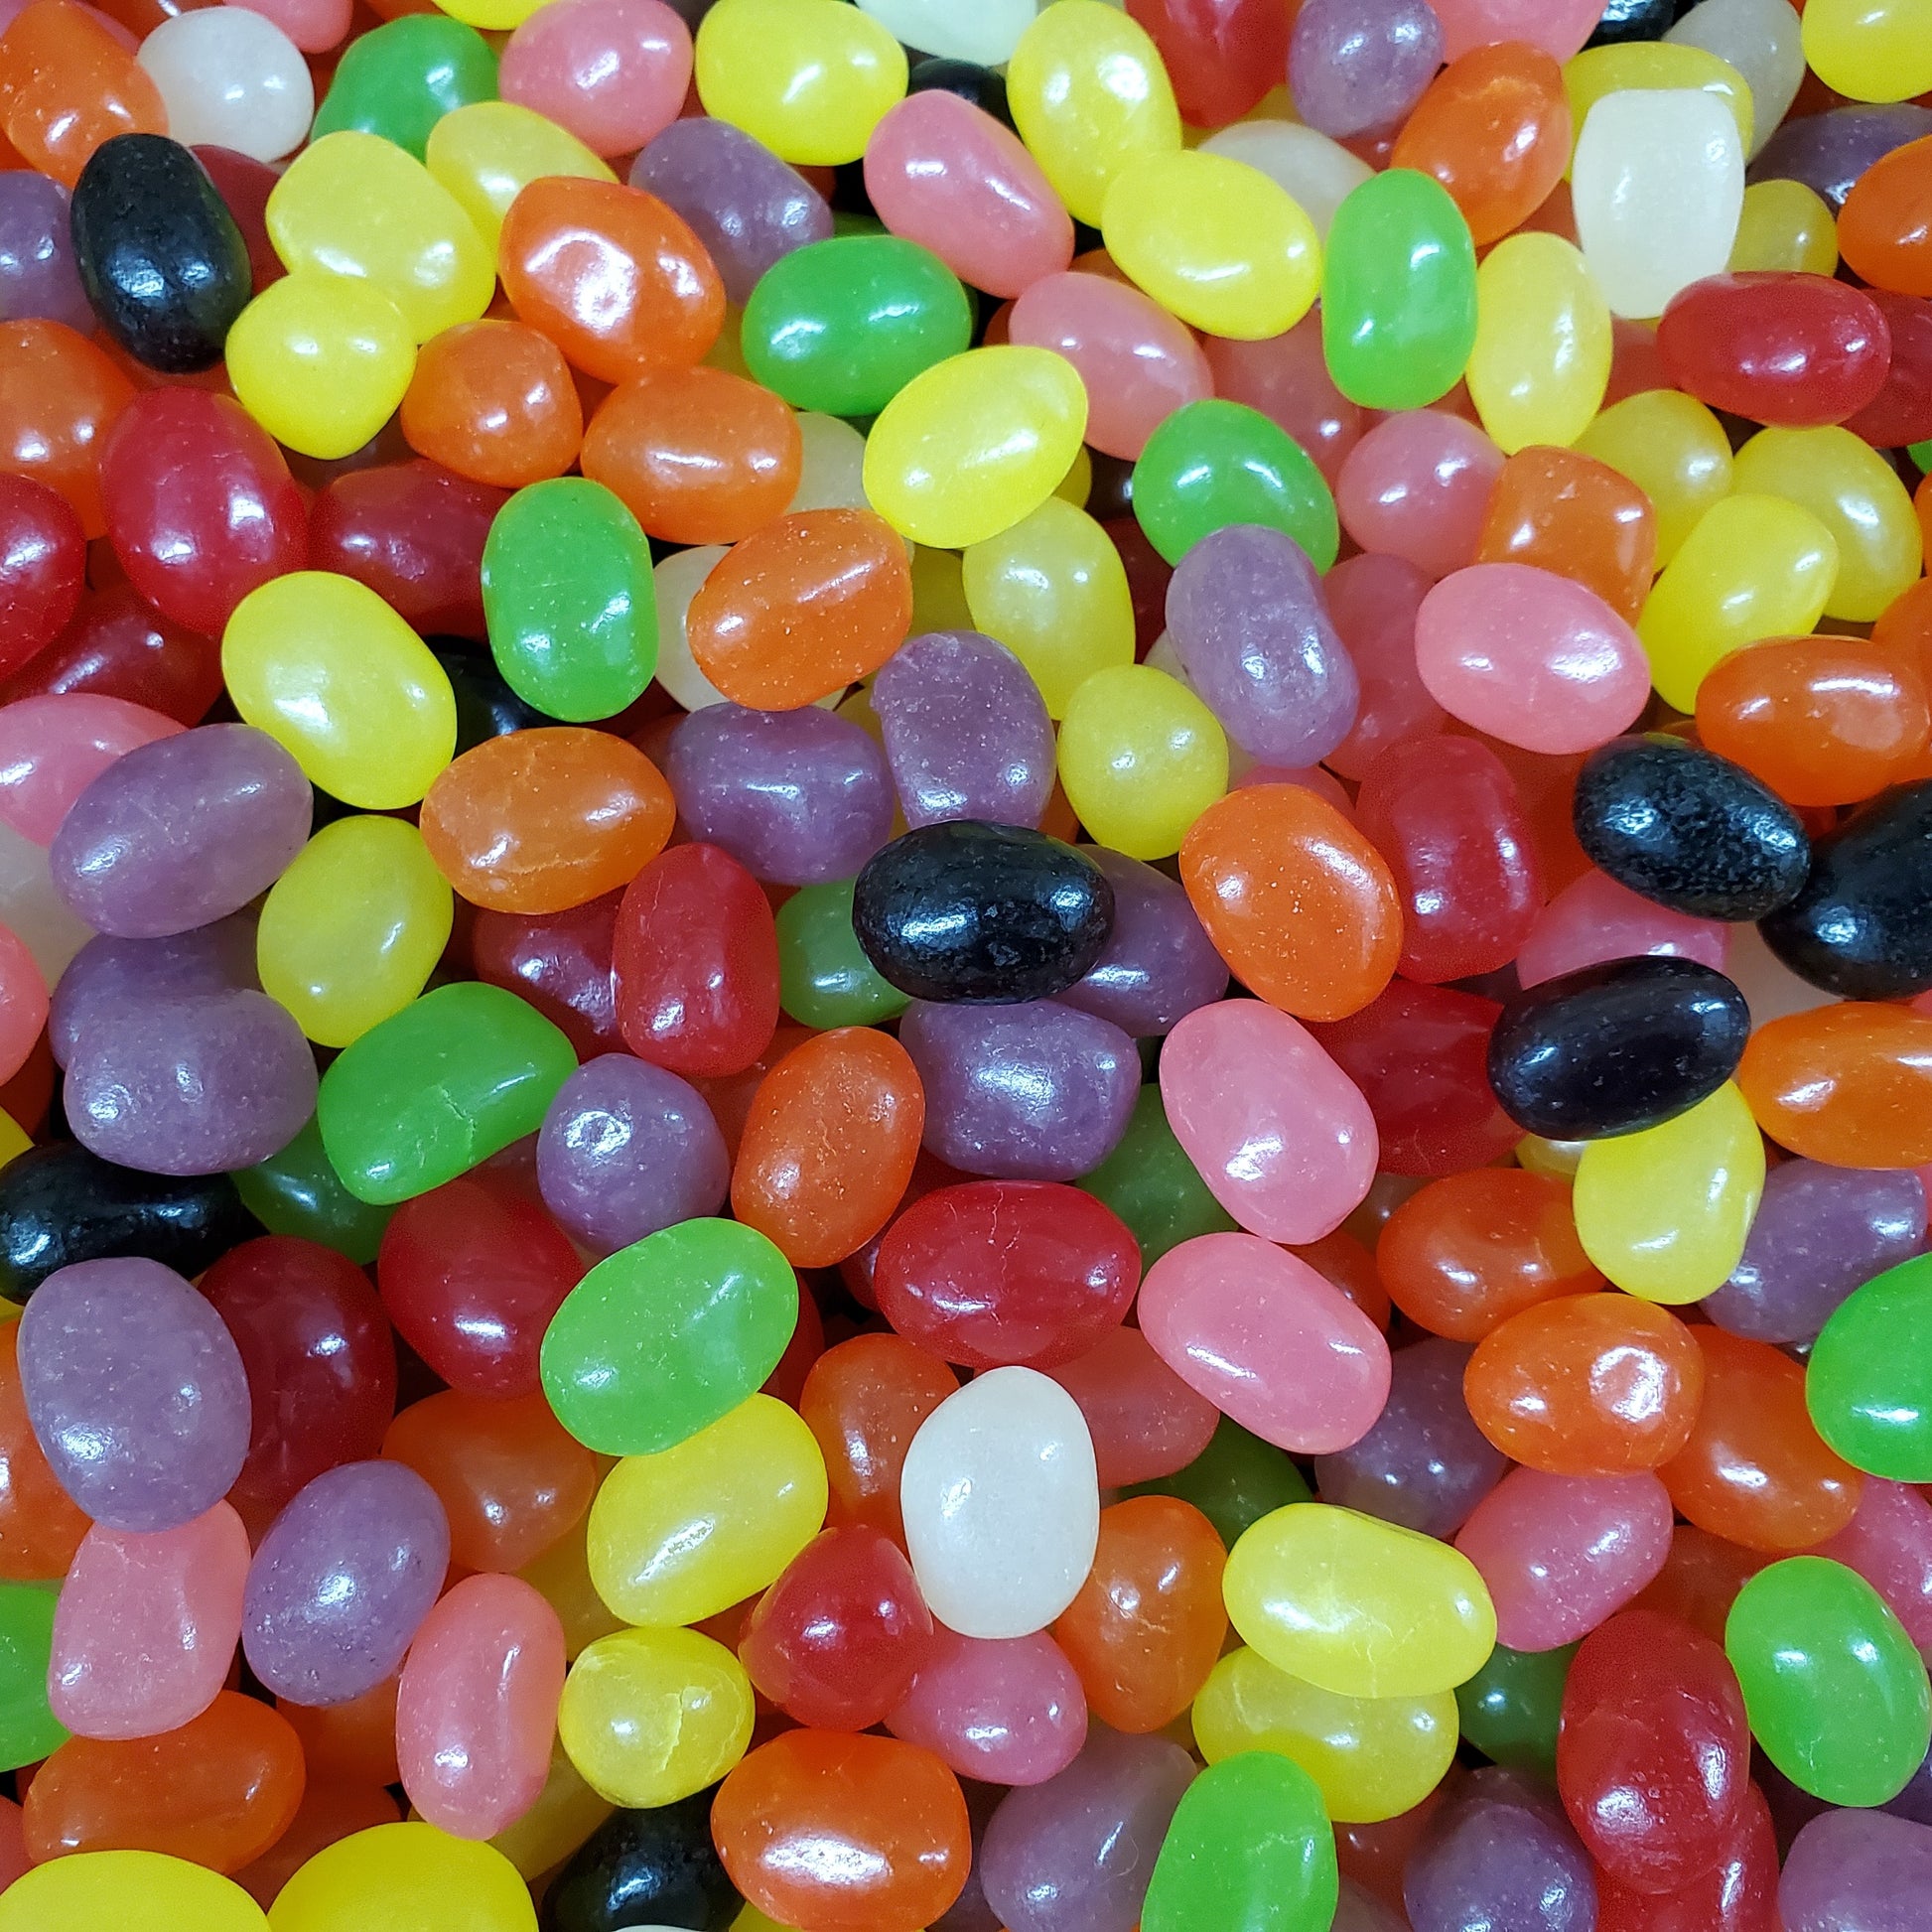 Classic Pectin Fruit Flavored Jelly Beans from Stage Stop Candy